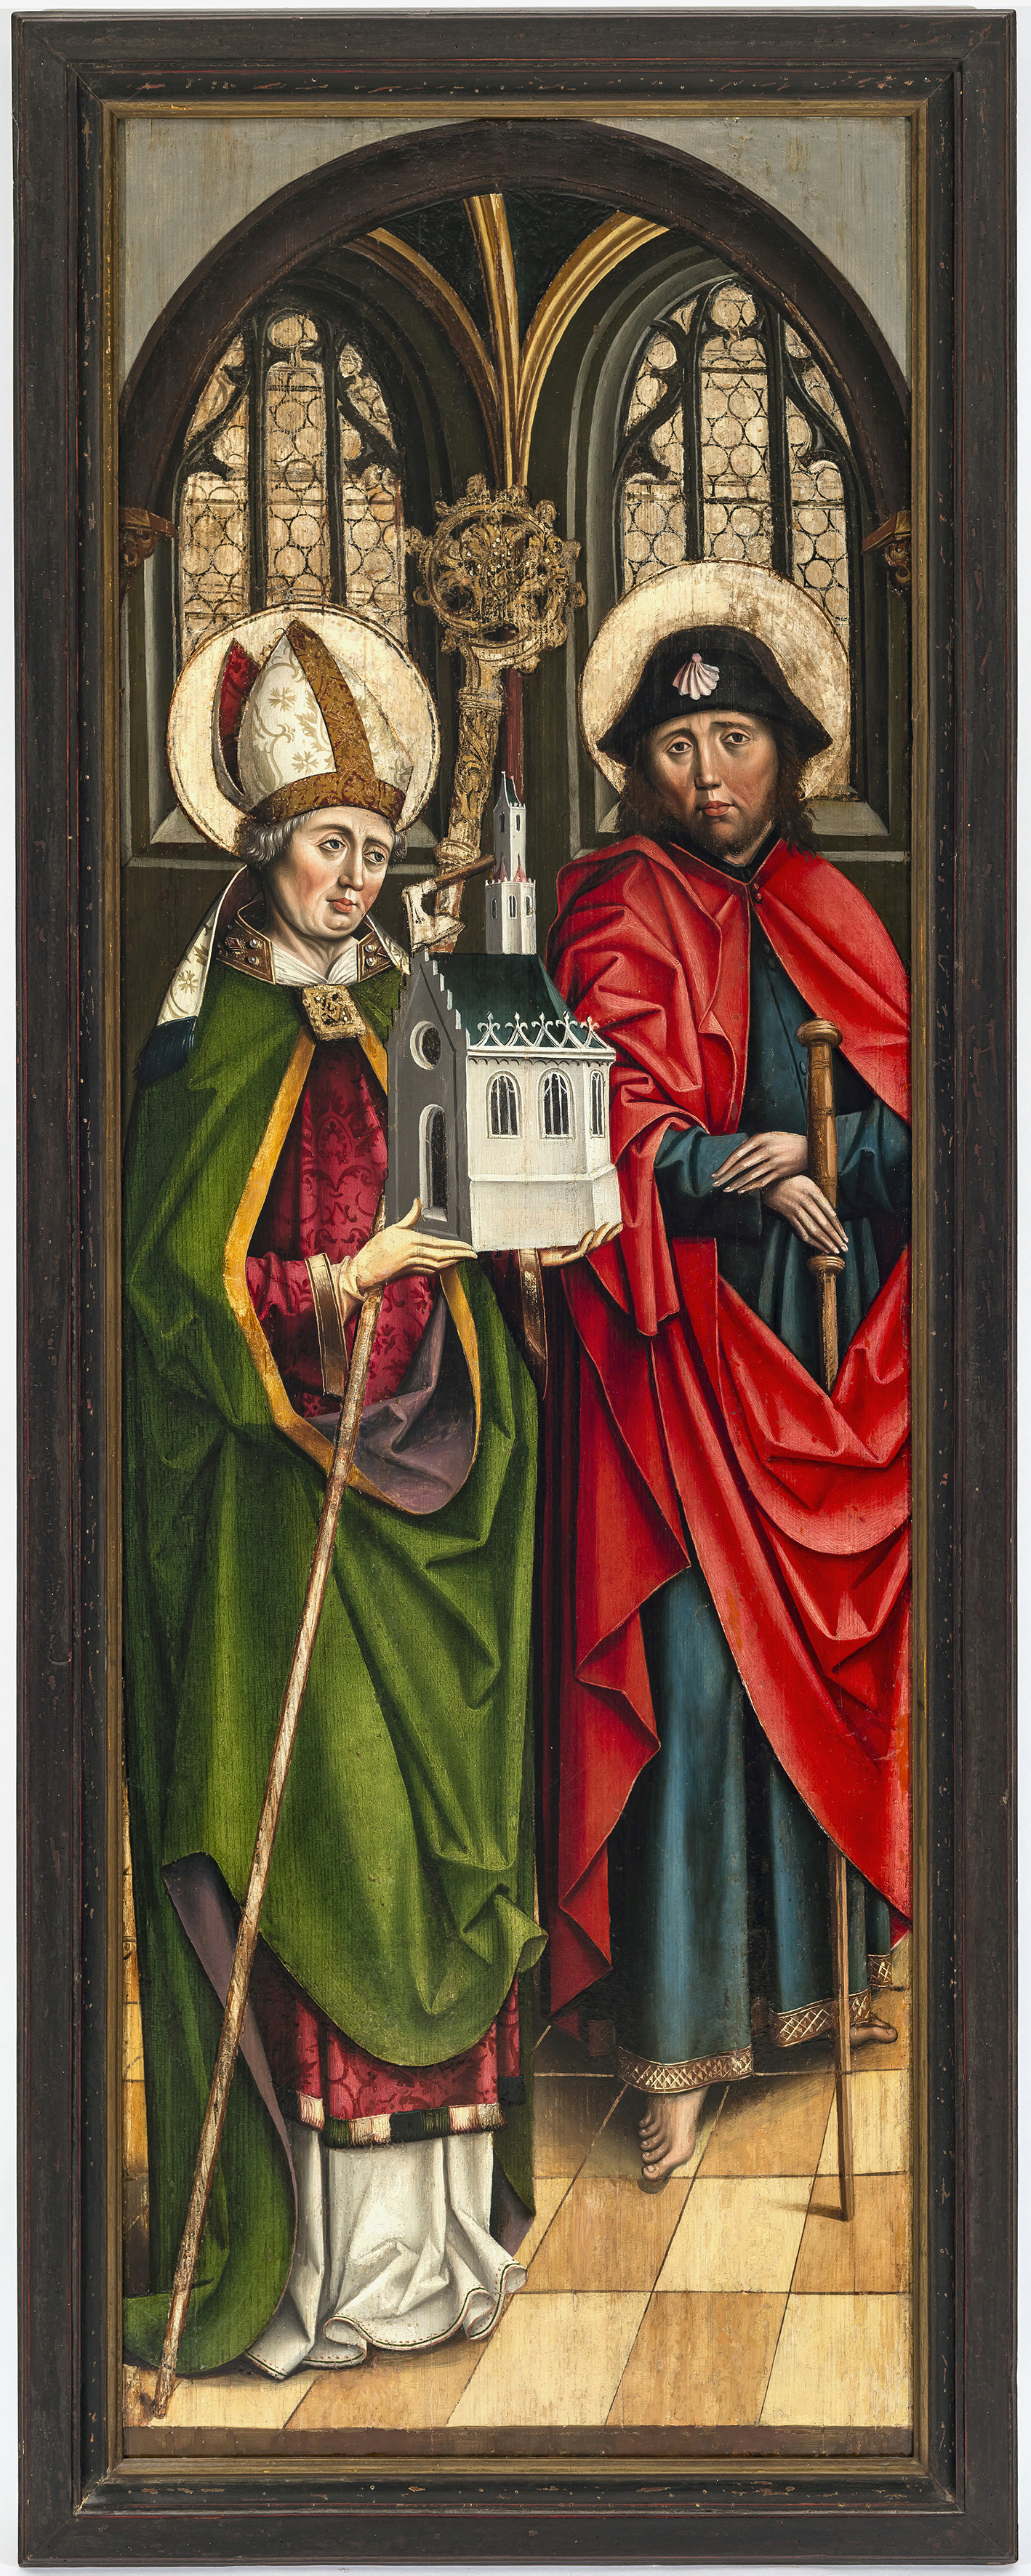 Master of the Ilsung-Madonna, active in Augsburg c. 1475 - Saint Wolfgang and Saint James the Great - Image 2 of 2